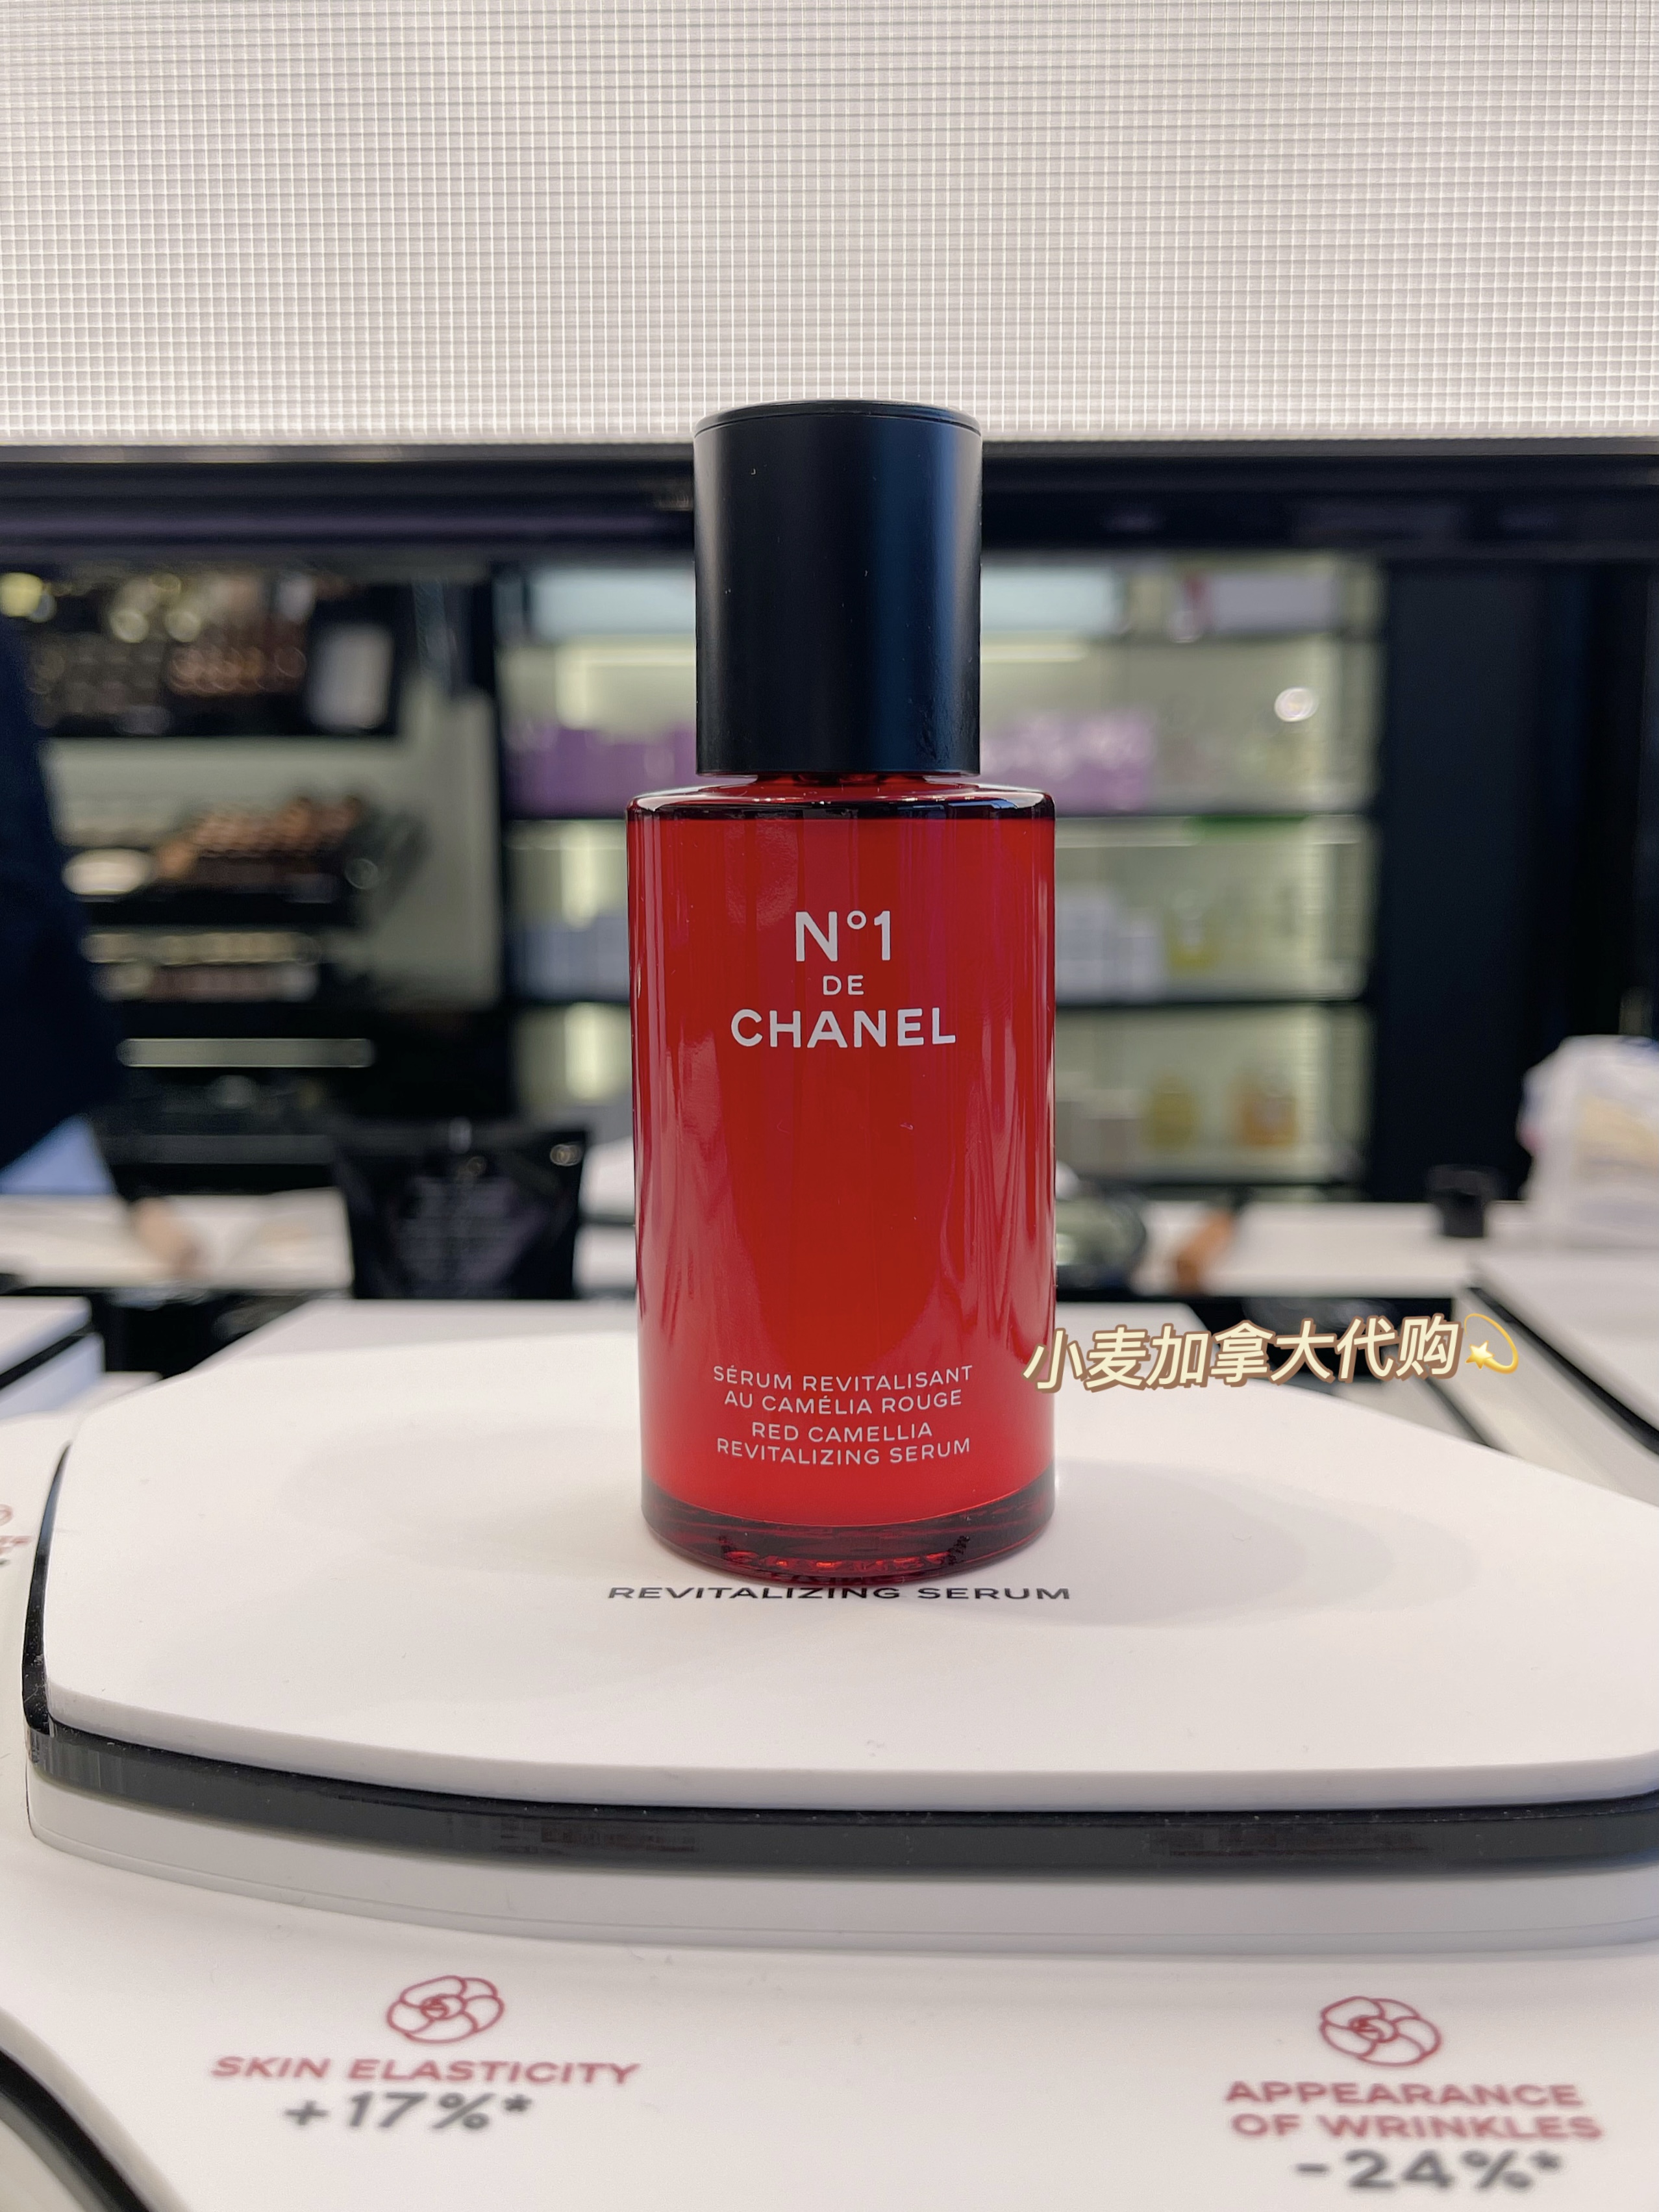 CHANEL Le Lift Firming  AntiWrinkle Sérum Review  BEAUTYcrew